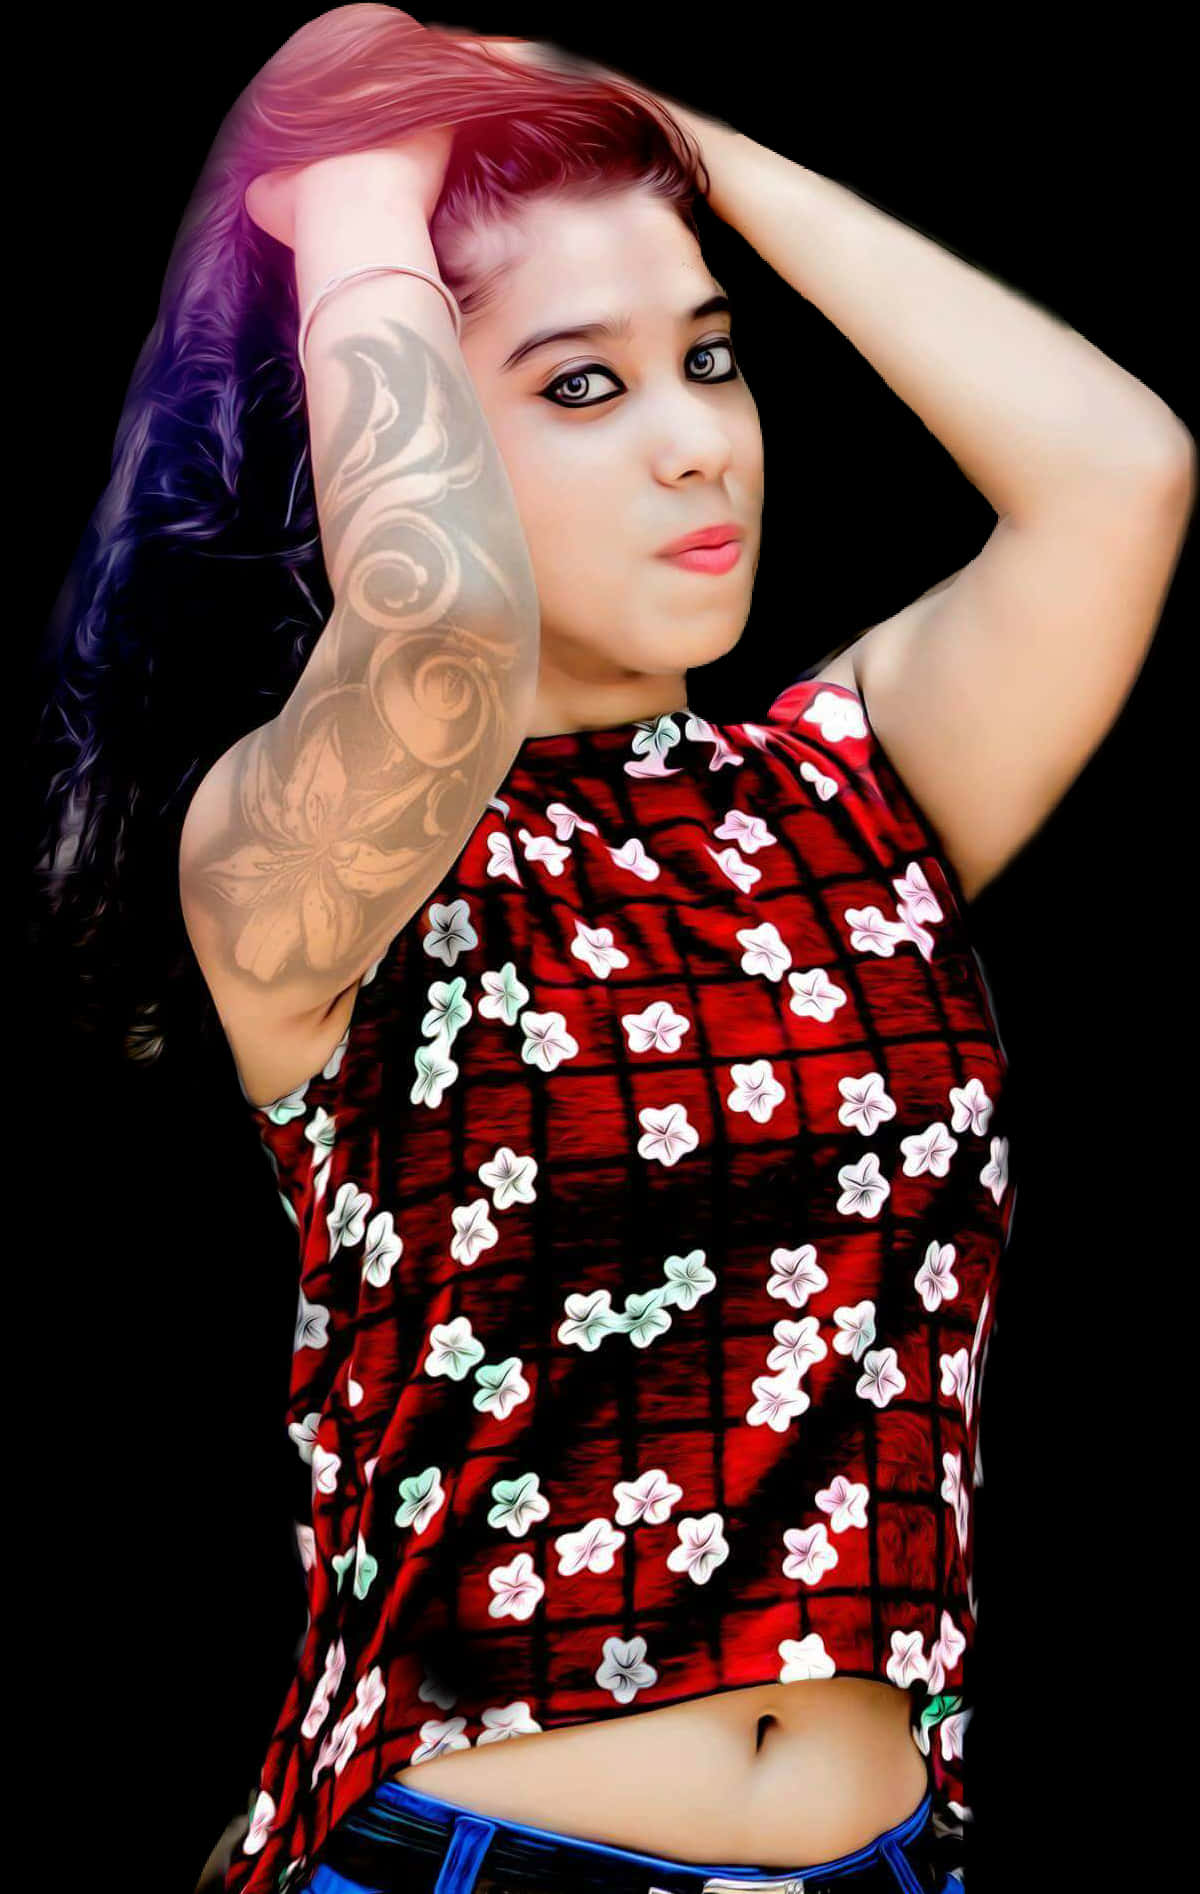 A Woman With Tattoos On Her Arm